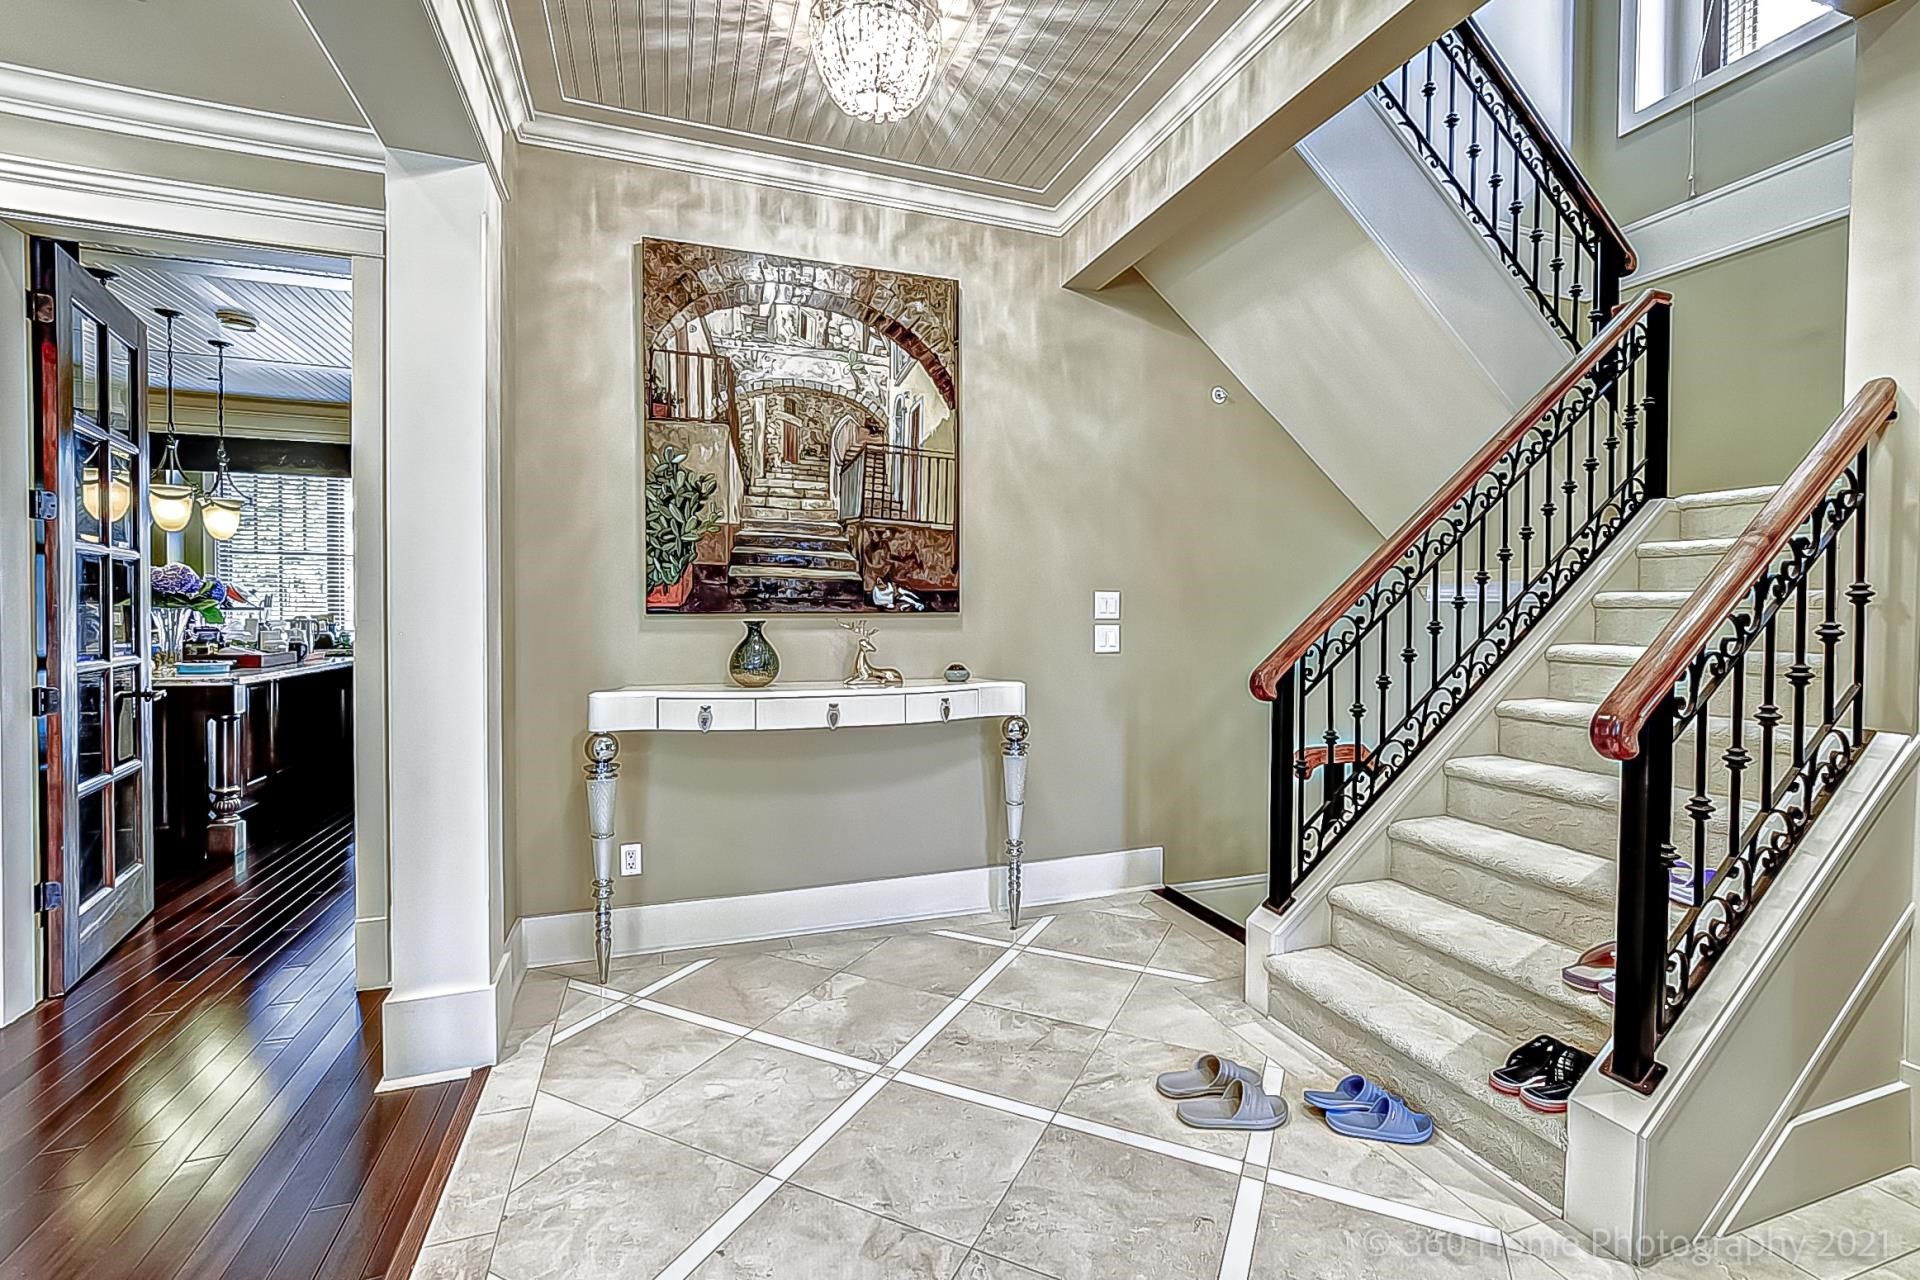 Photo 12: Photos: 4063 W 39TH Avenue in Vancouver: Dunbar House for sale (Vancouver West)  : MLS®# R2617730